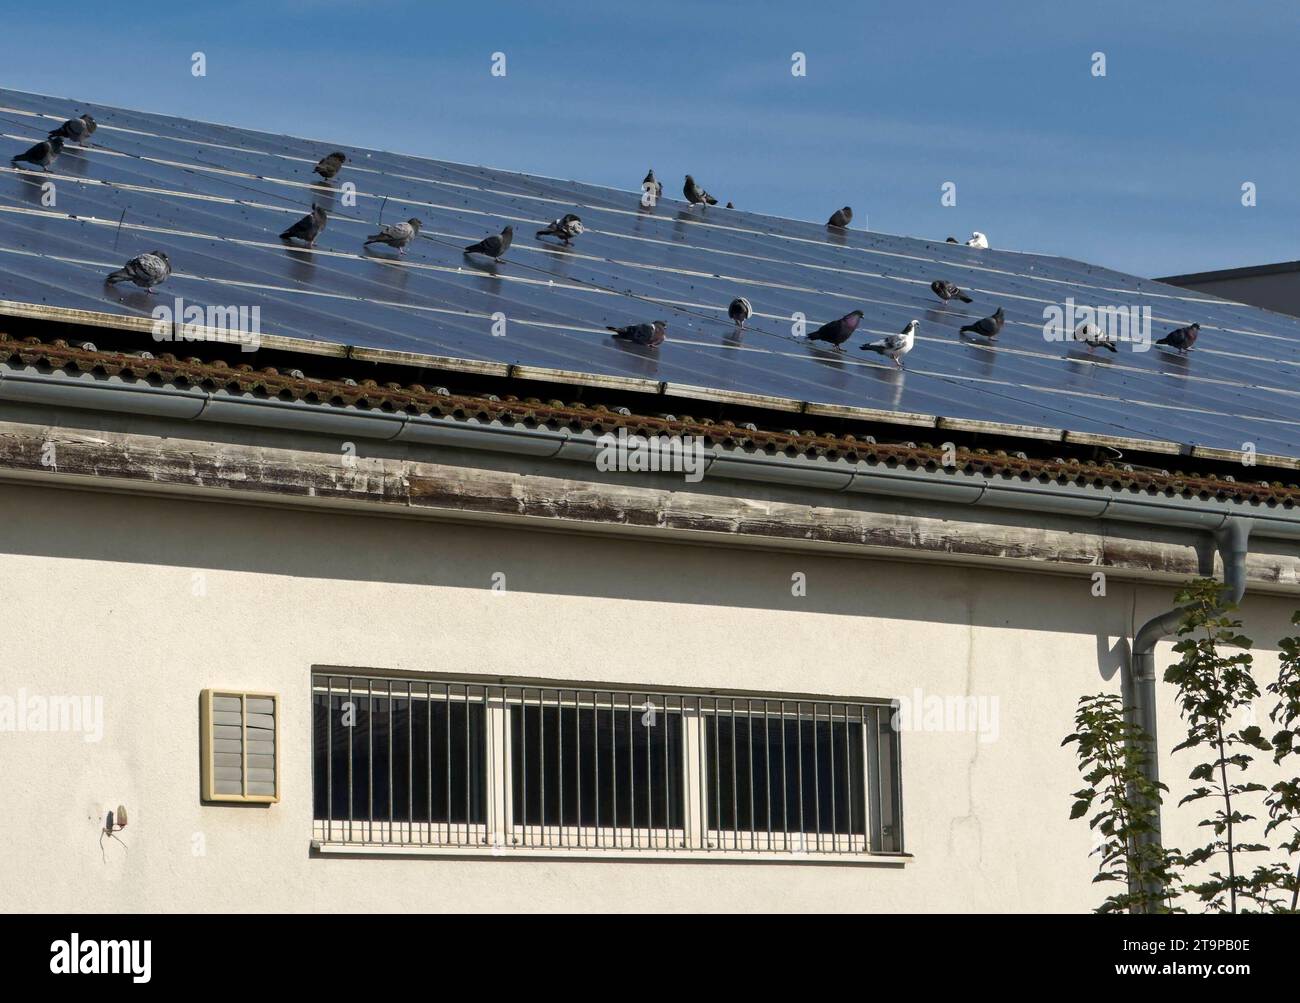 Pigeon on a photovoltaik roof in Marktoberdorf, Germania, 16 ottobre 2023. Credito: Imago/Alamy Live News Foto Stock